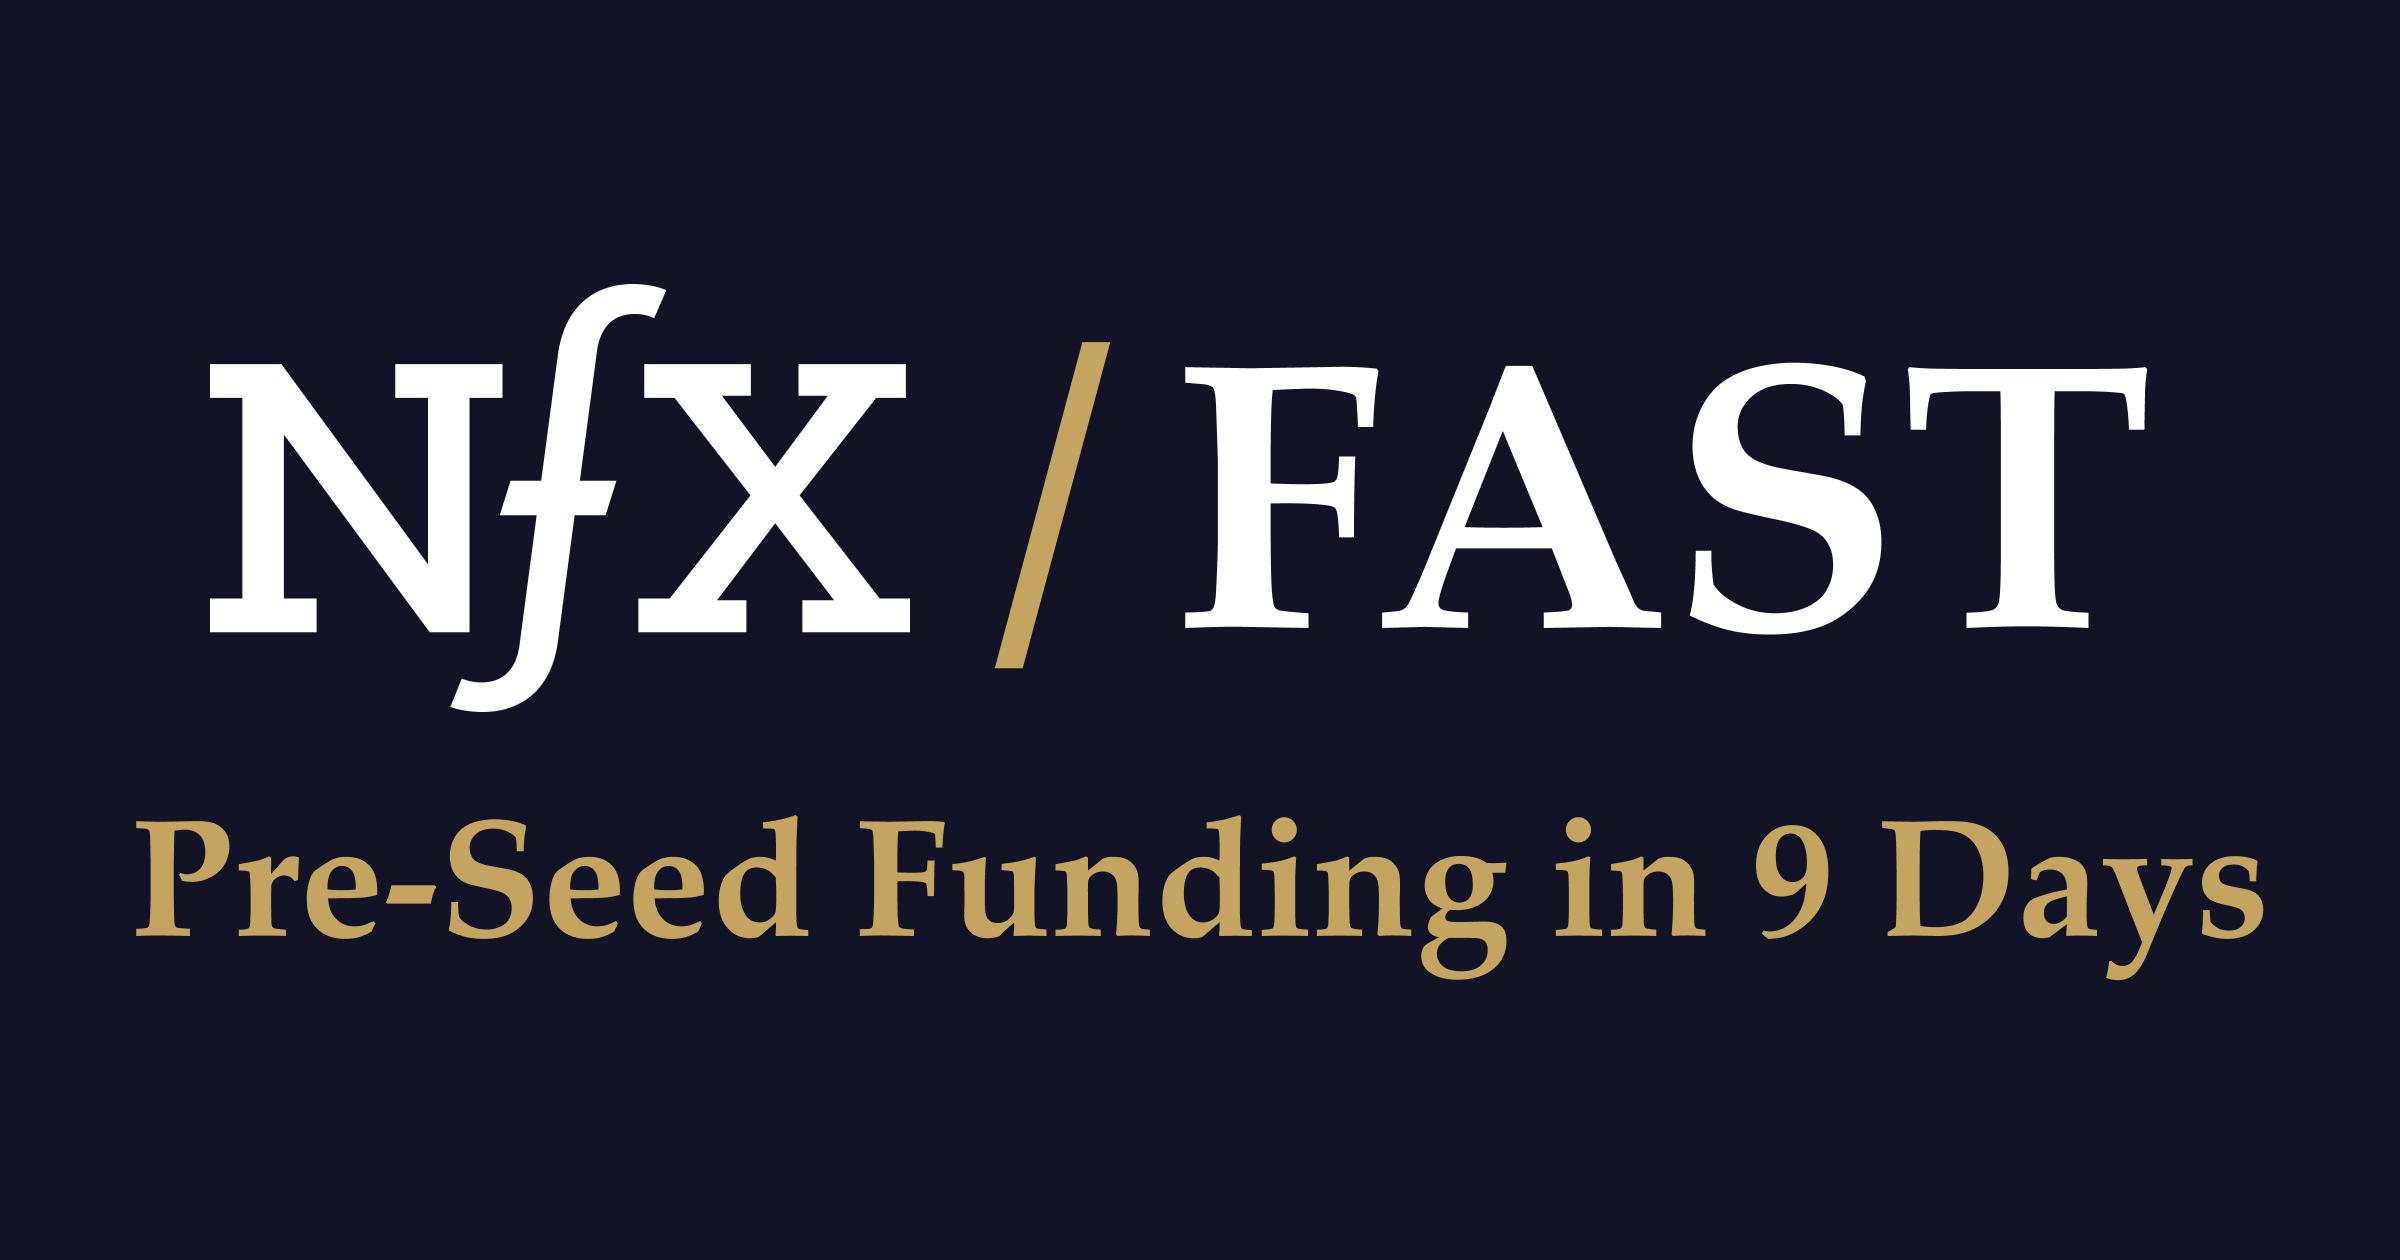 6 New NFX FASTs: Pre-Seed & Seed Funding In 9 Days